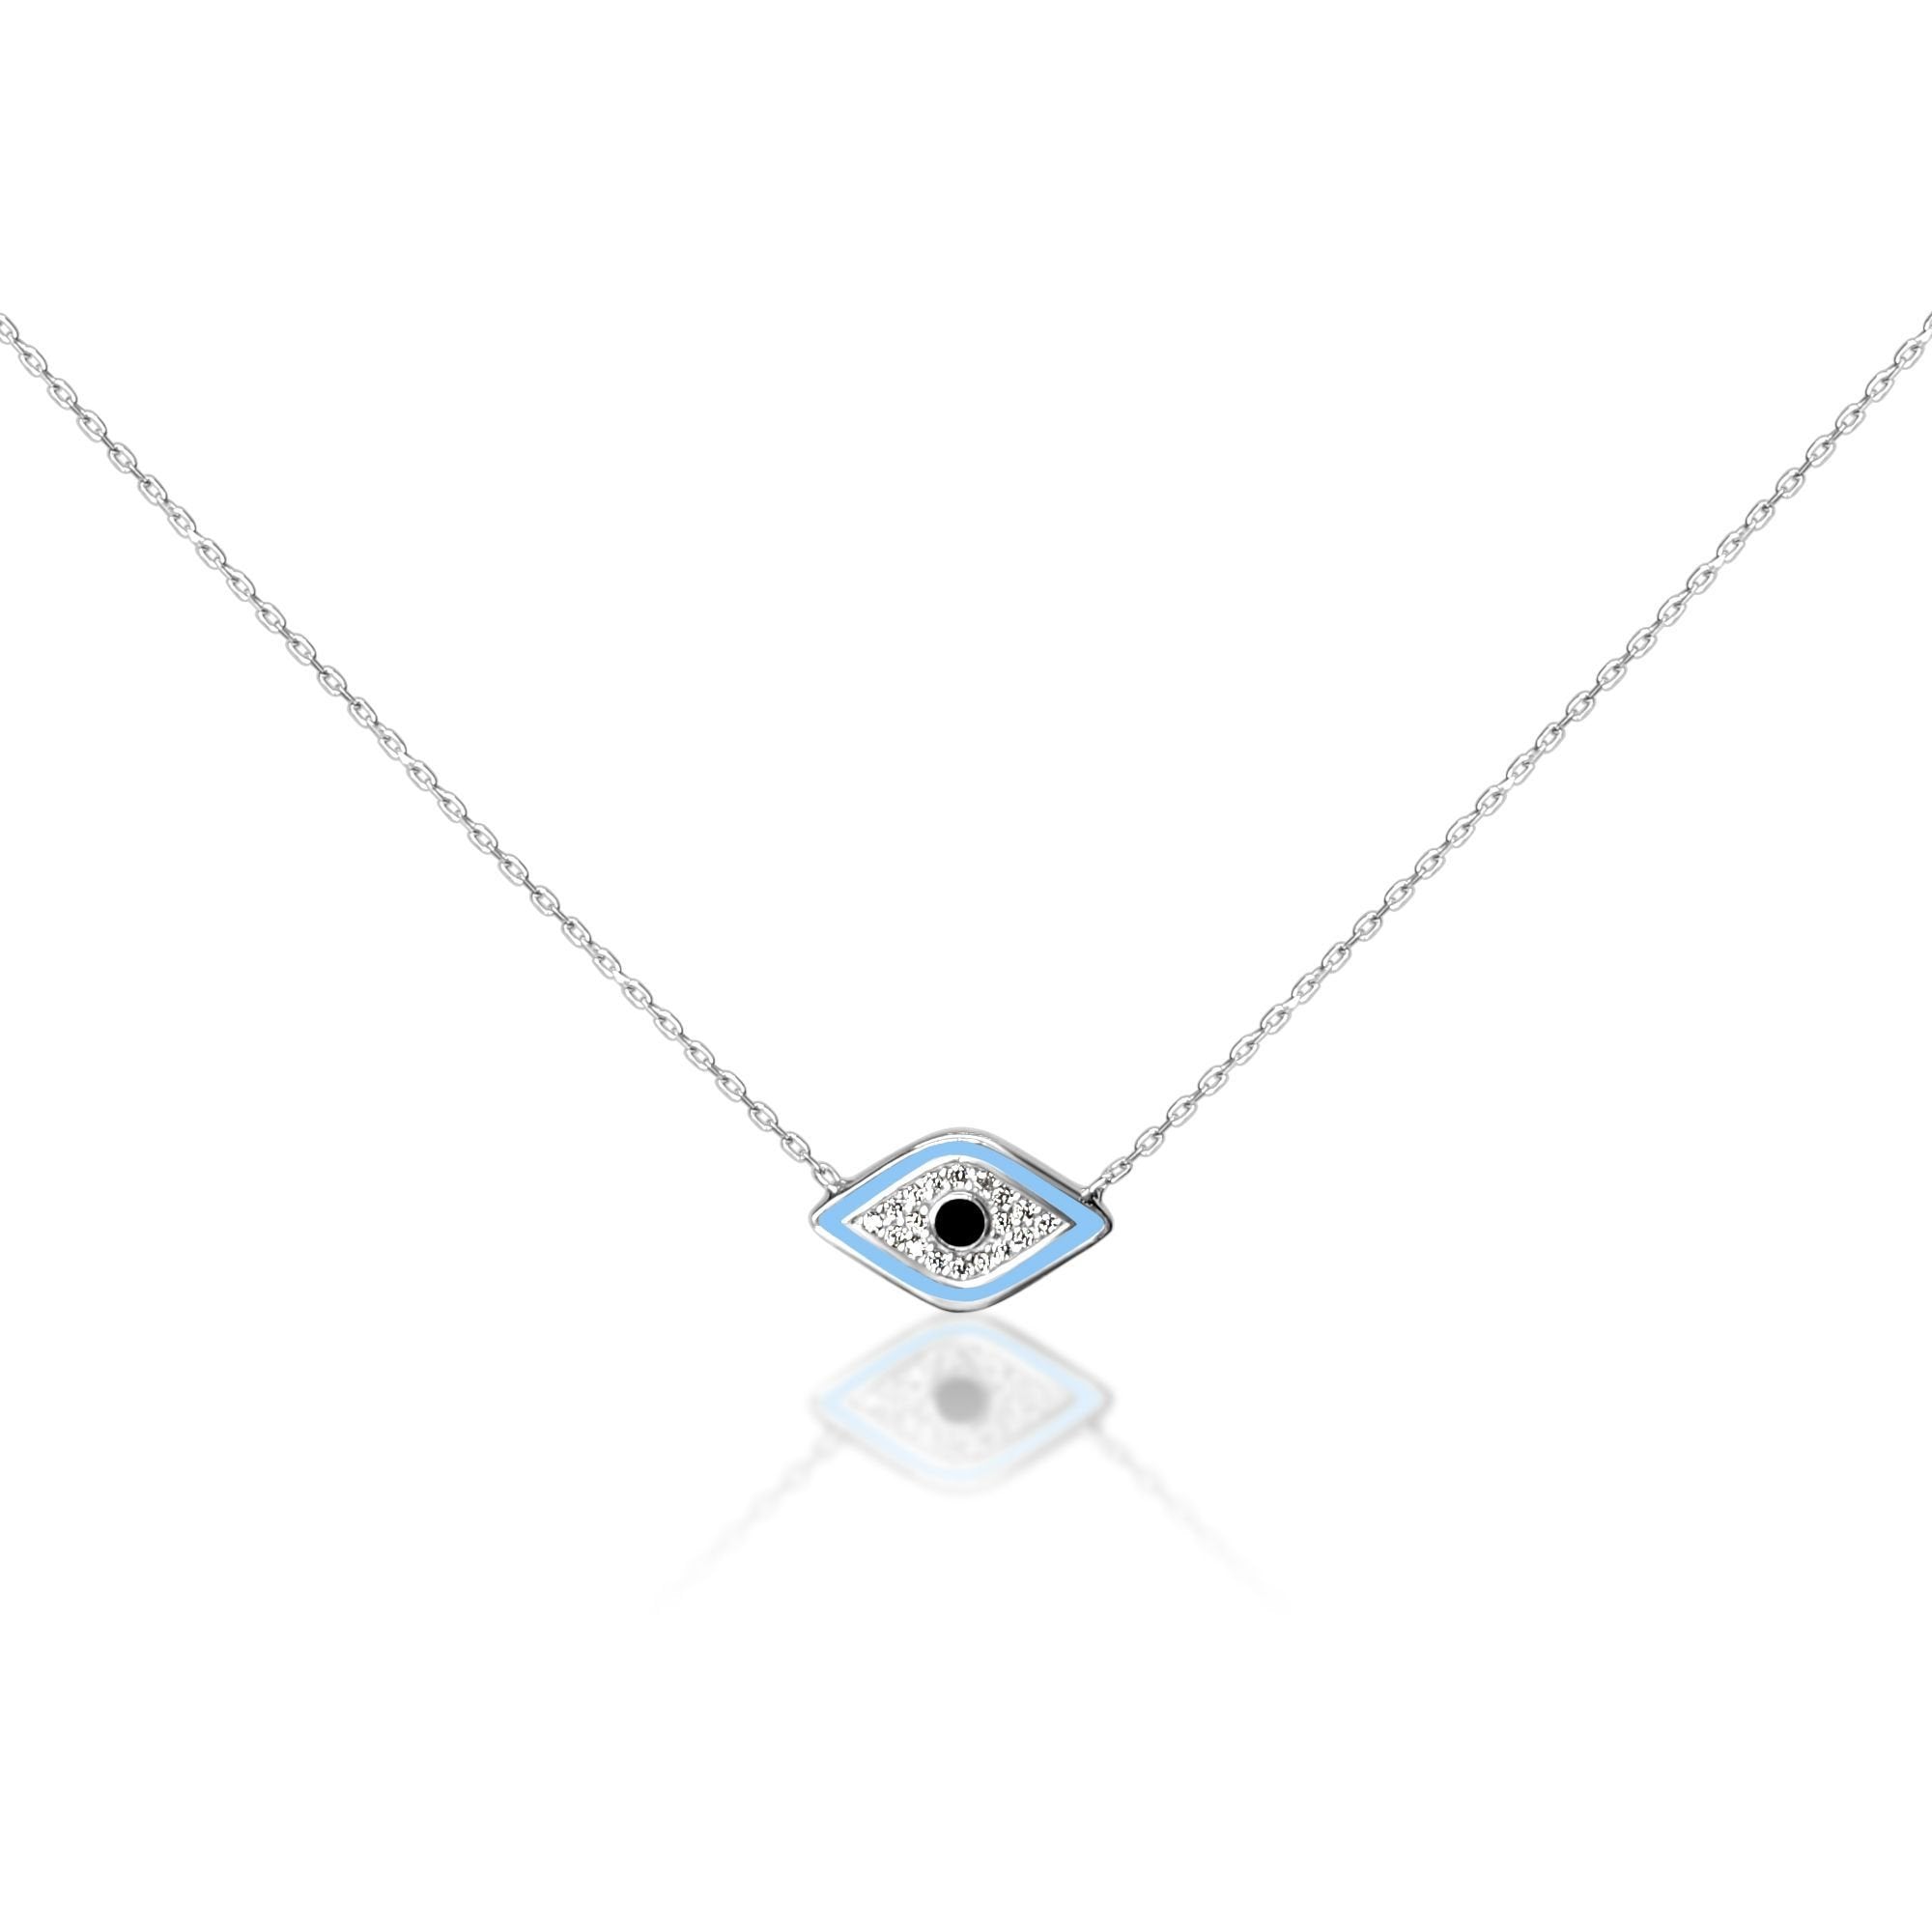 silver pendant with evil eye charm